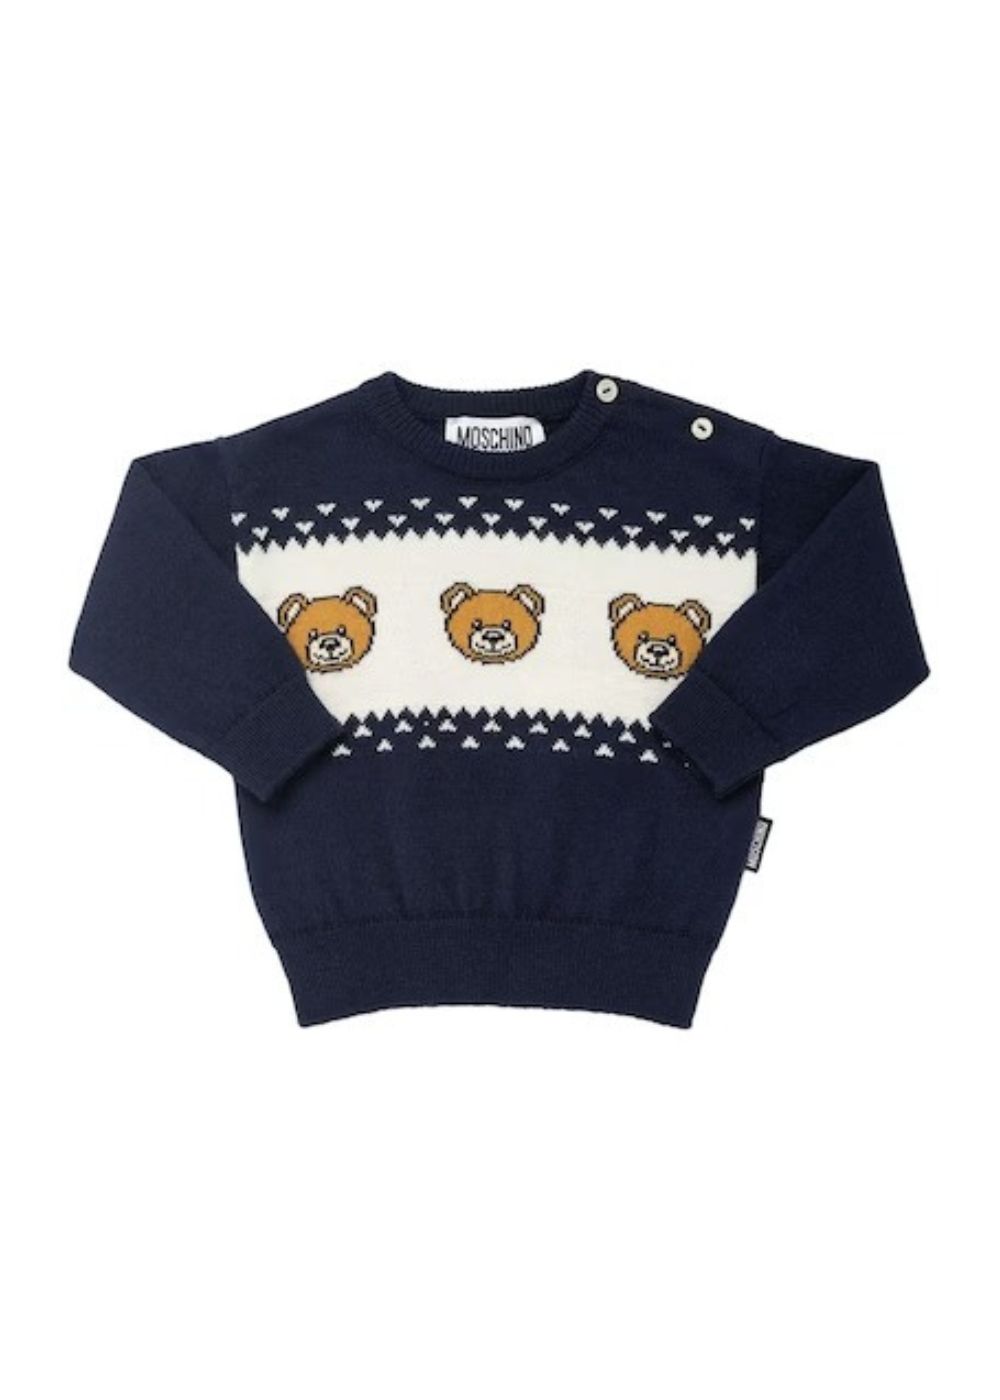 Featured image for “Moschino Maglione Teddy Bear”